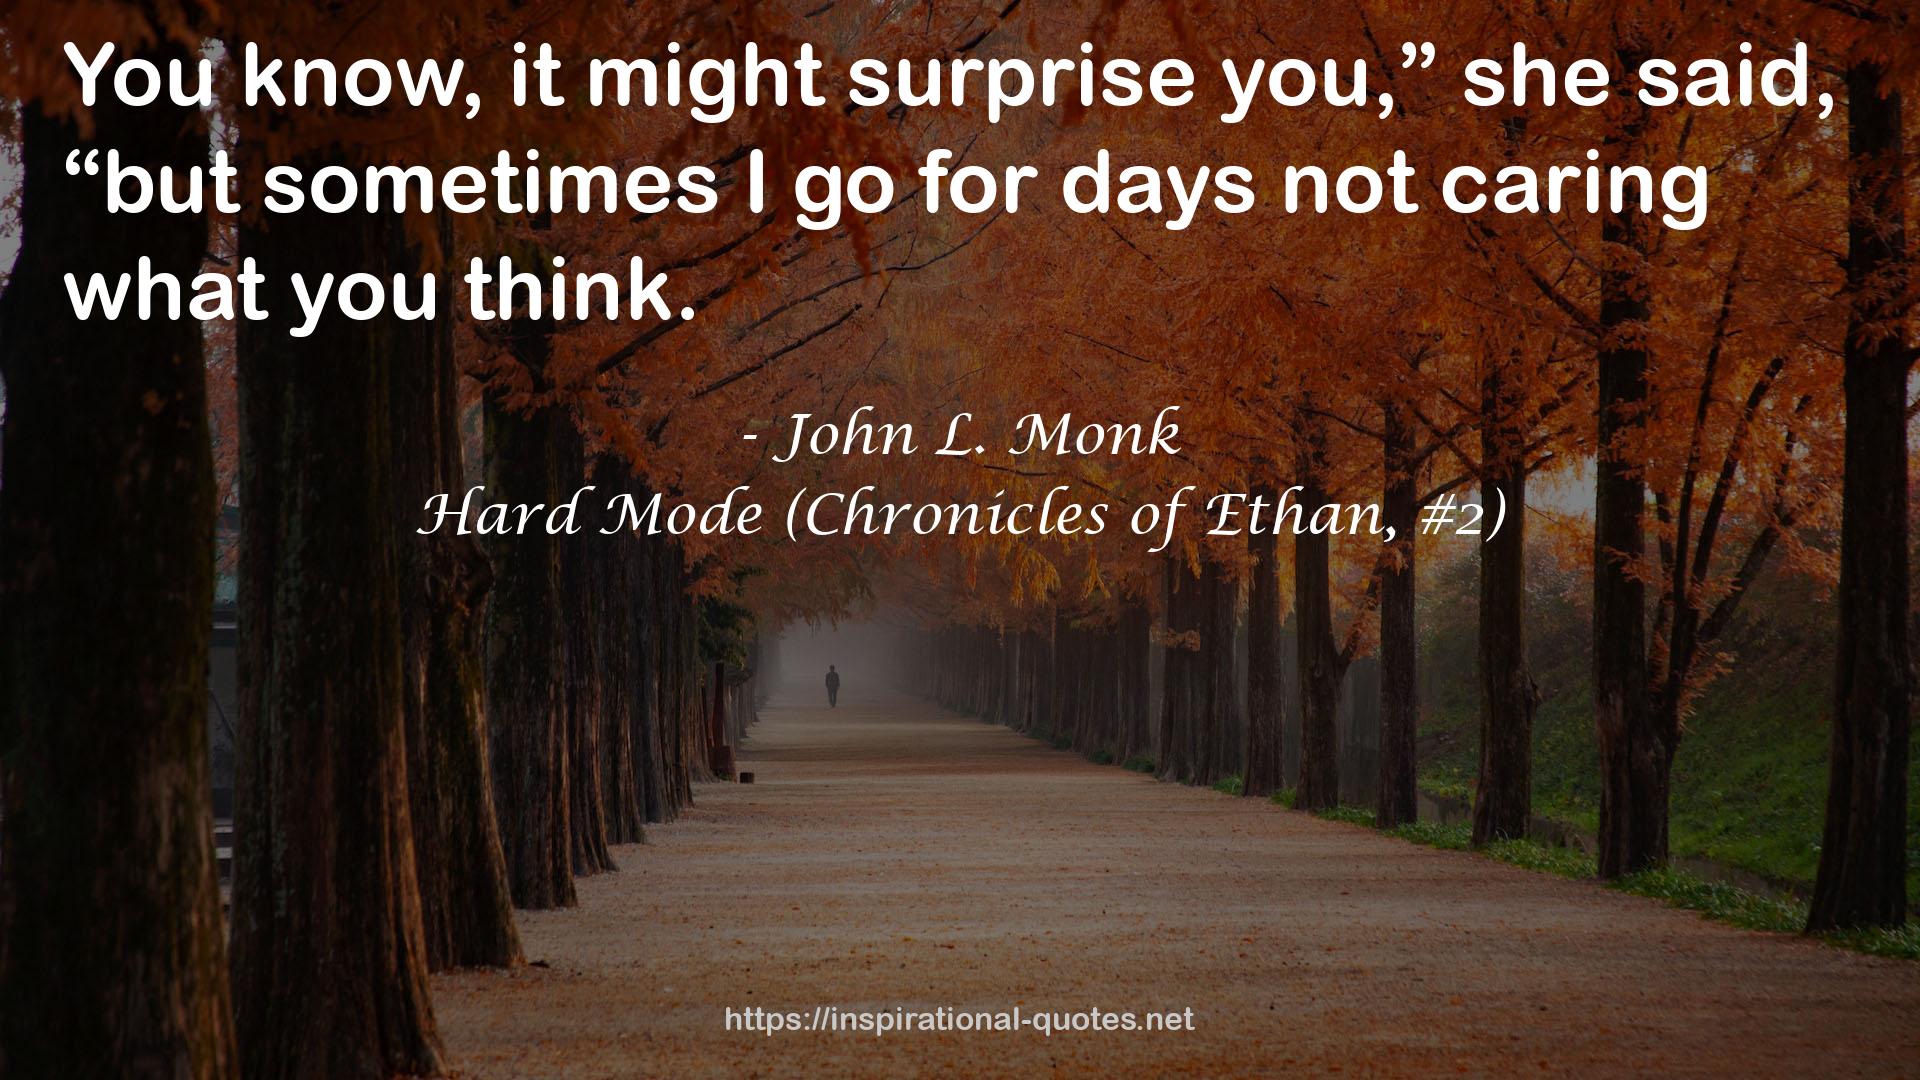 Hard Mode (Chronicles of Ethan, #2) QUOTES